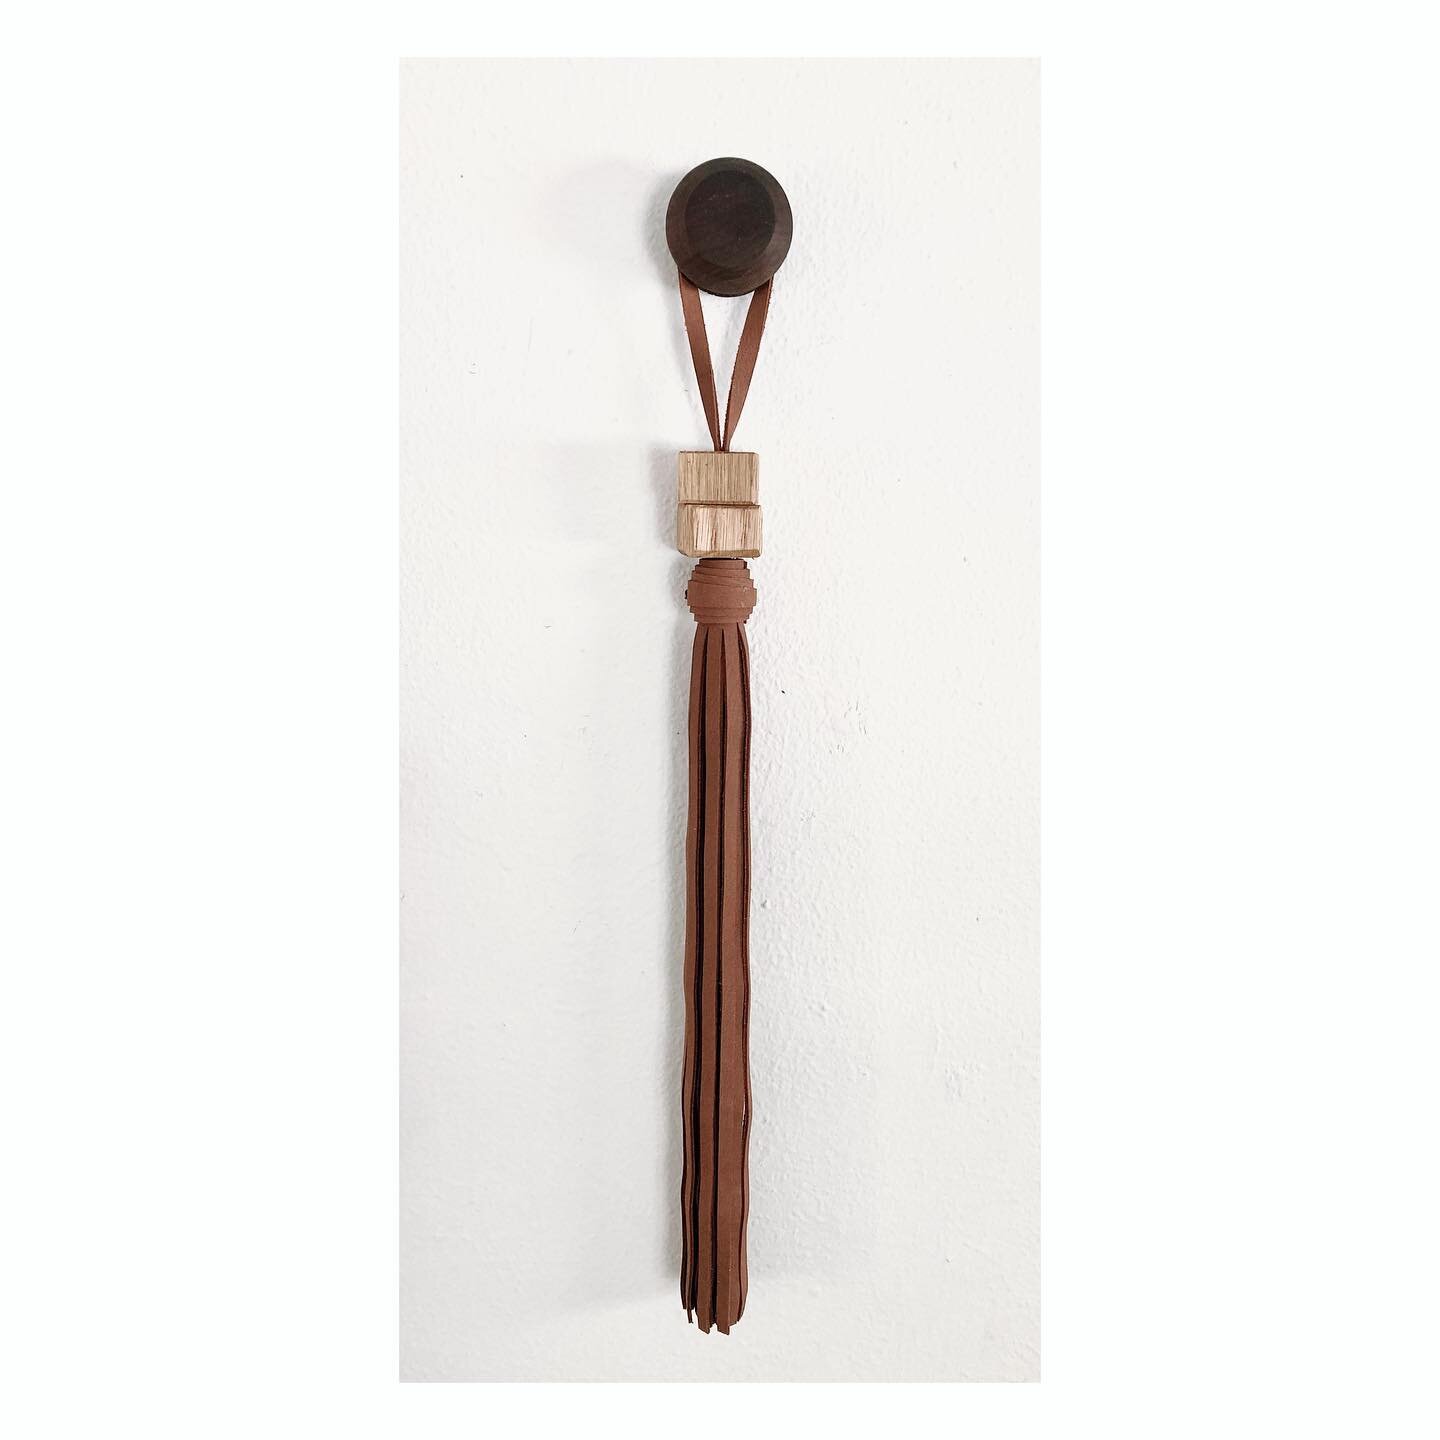 I&rsquo;ve been motivated lately to design and make a few new objects to add to my body of work. This hanging leather tassel has a solid white oak wood pieces acquired from @boulderfurniturearts (thank you!) 
And I&rsquo;ve been collaborating with @h